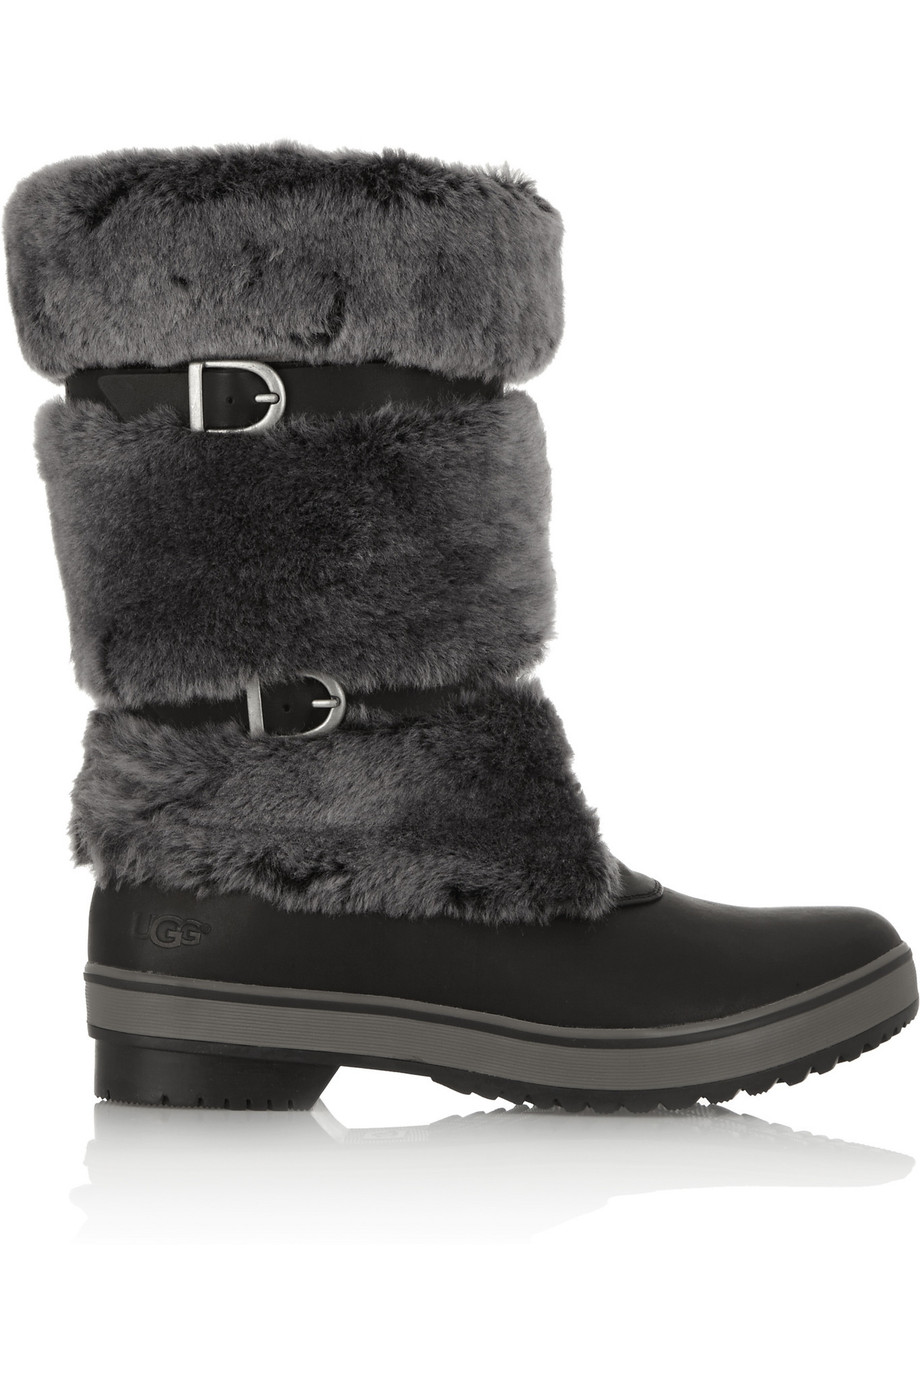 uggs for snow and ice